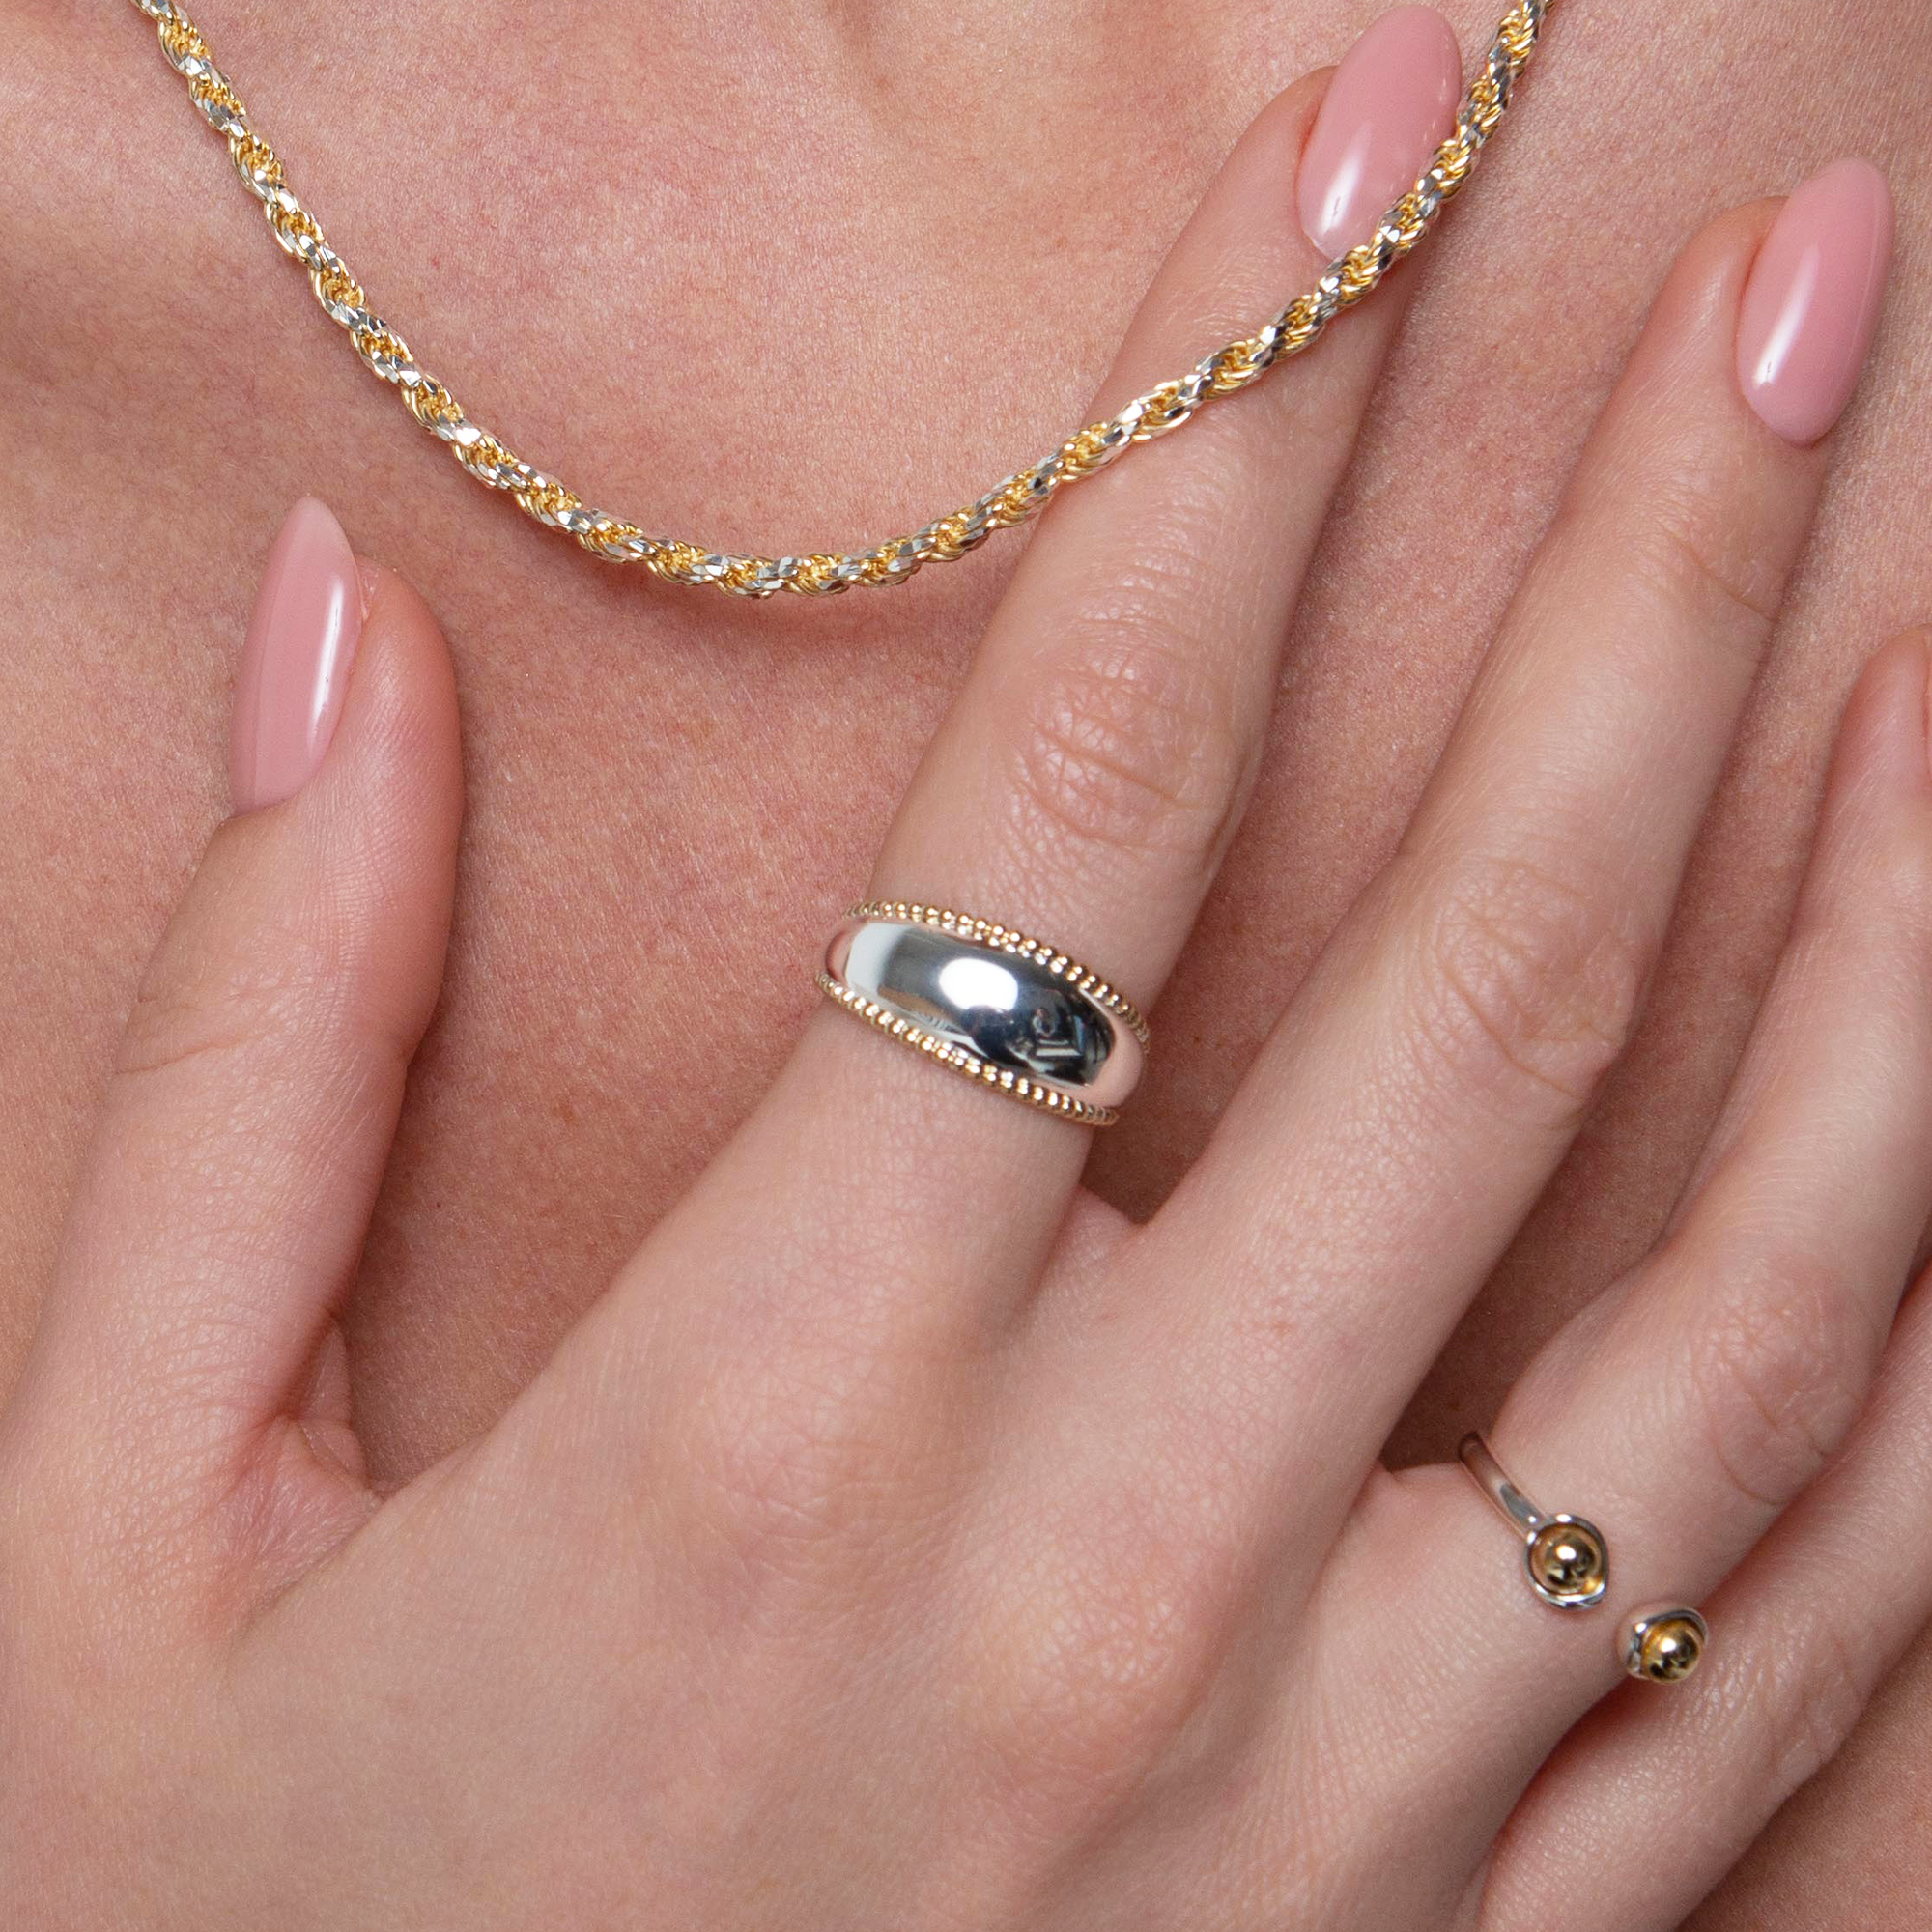 THE SPLIT TWO TONE BALL RING